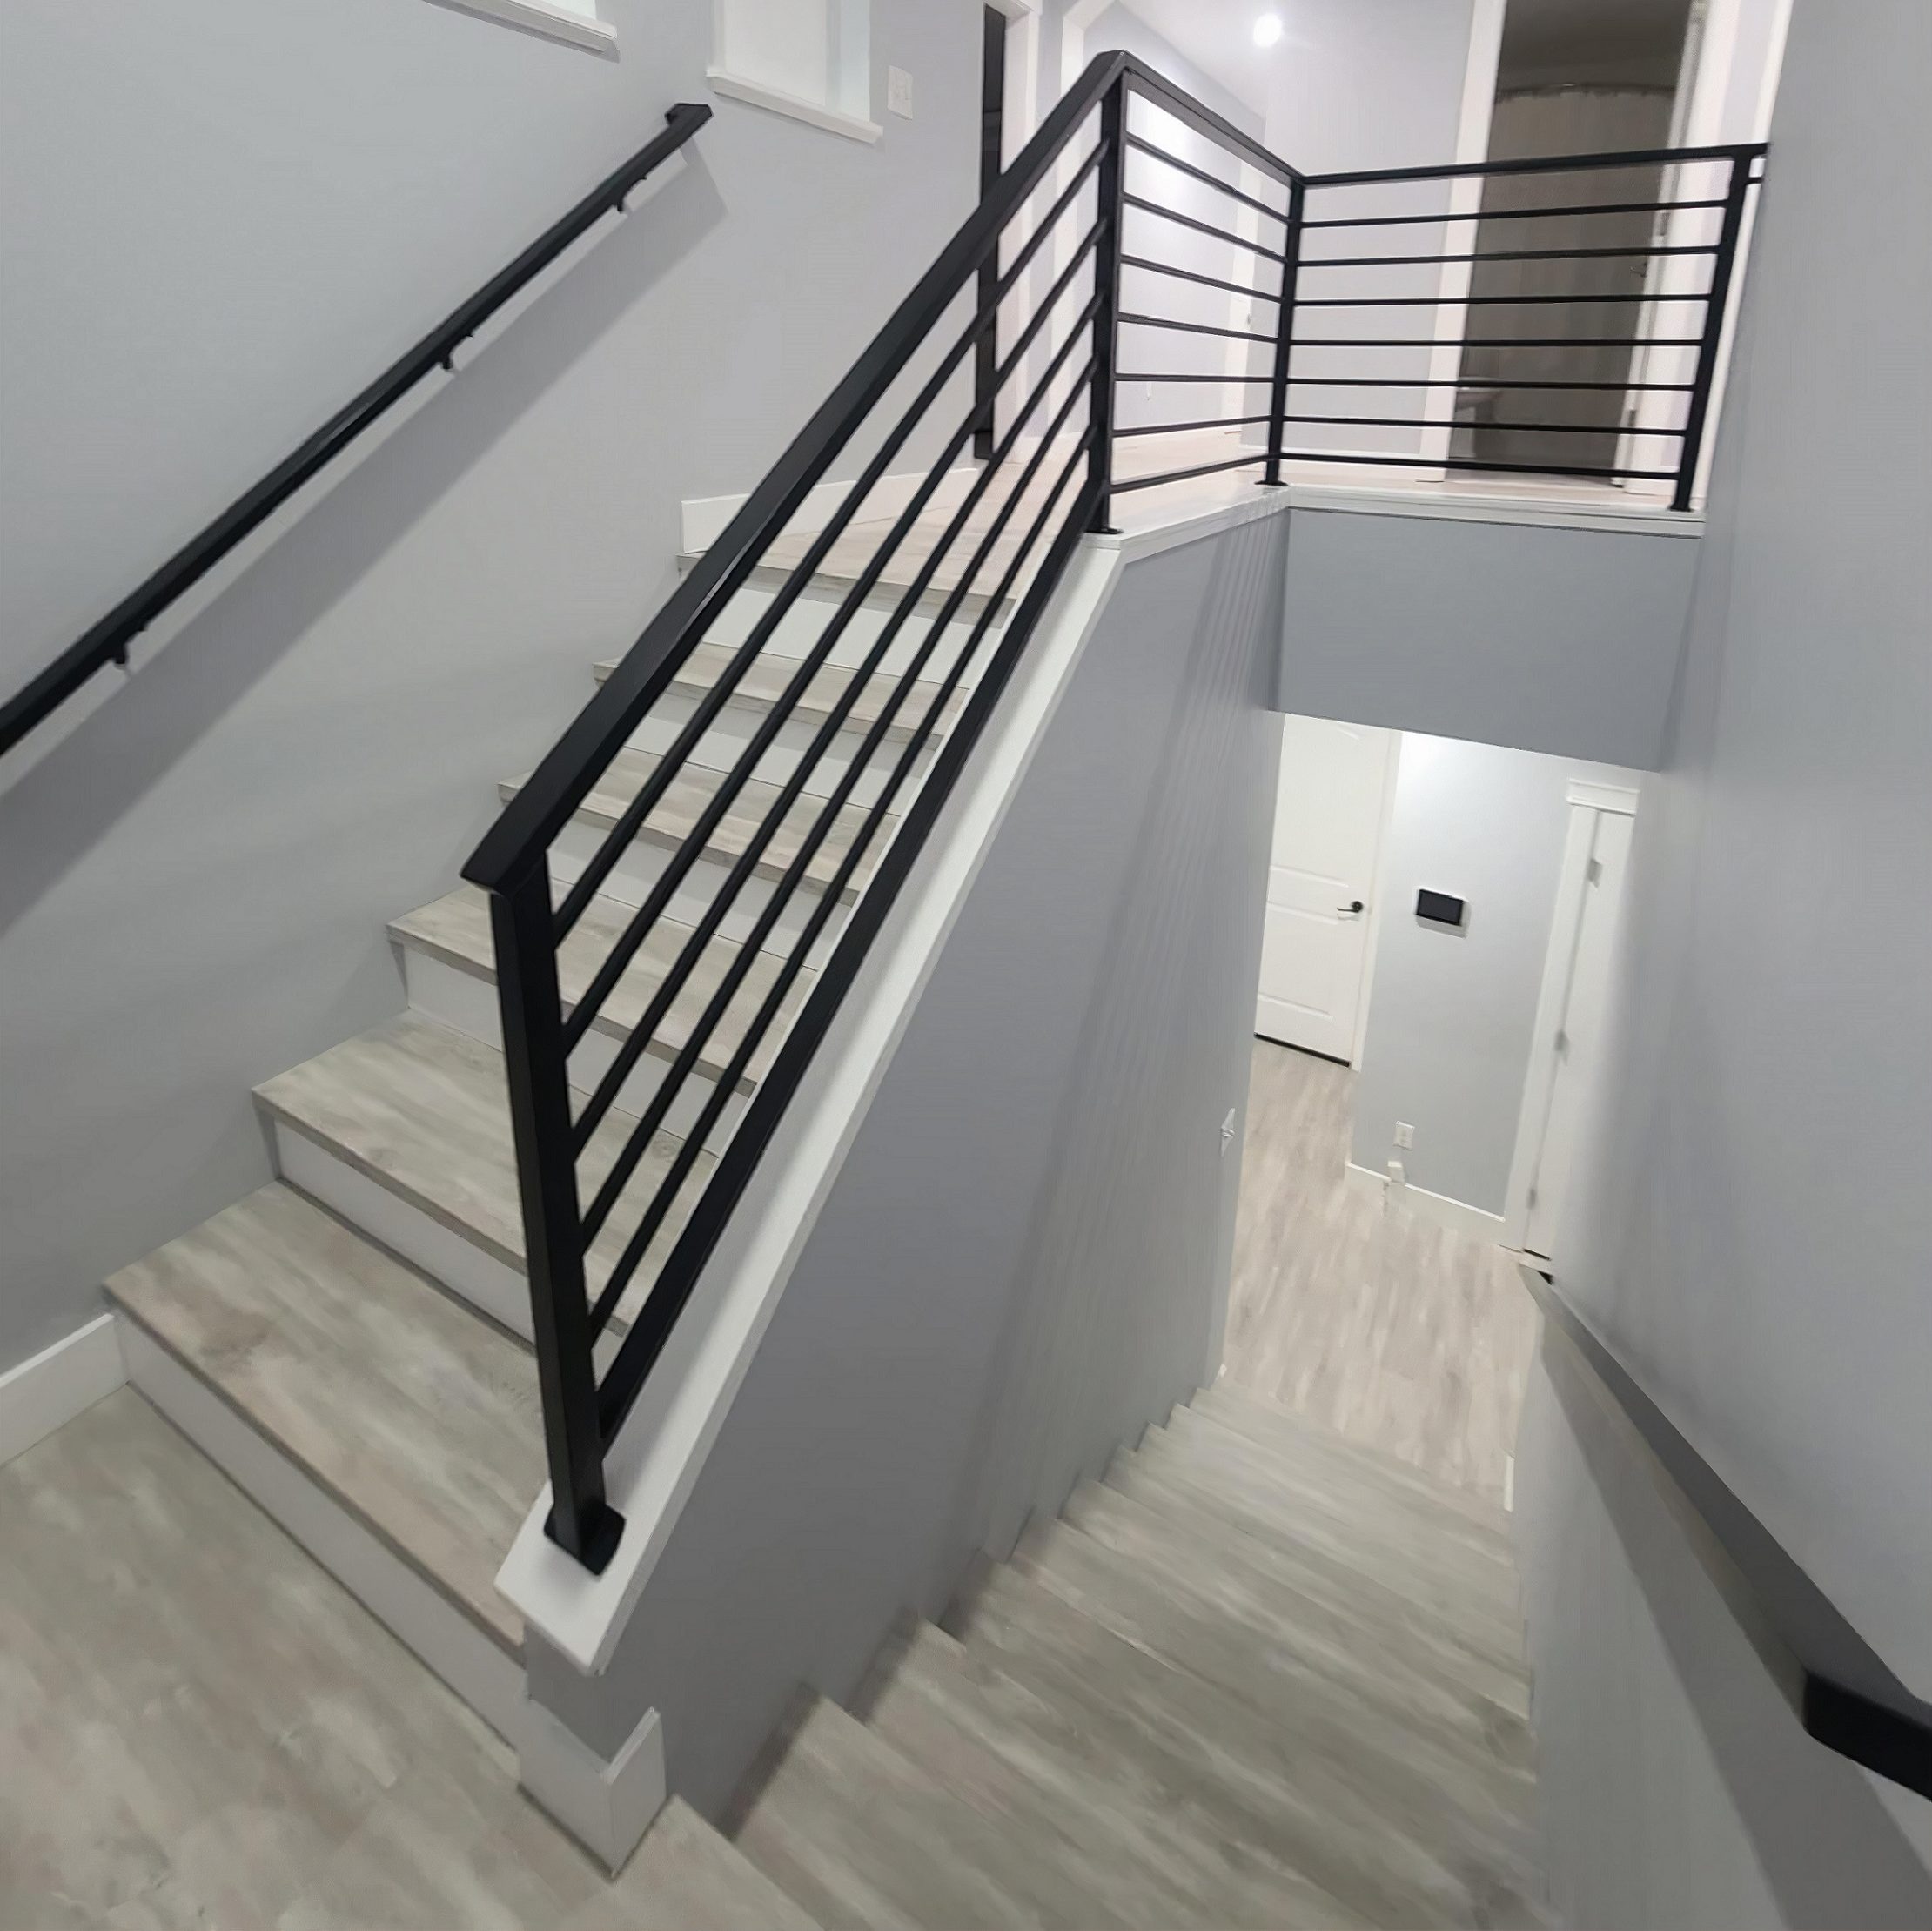 stairs in a home with a black metal banister and a light-colored, wood-look laminate flooring